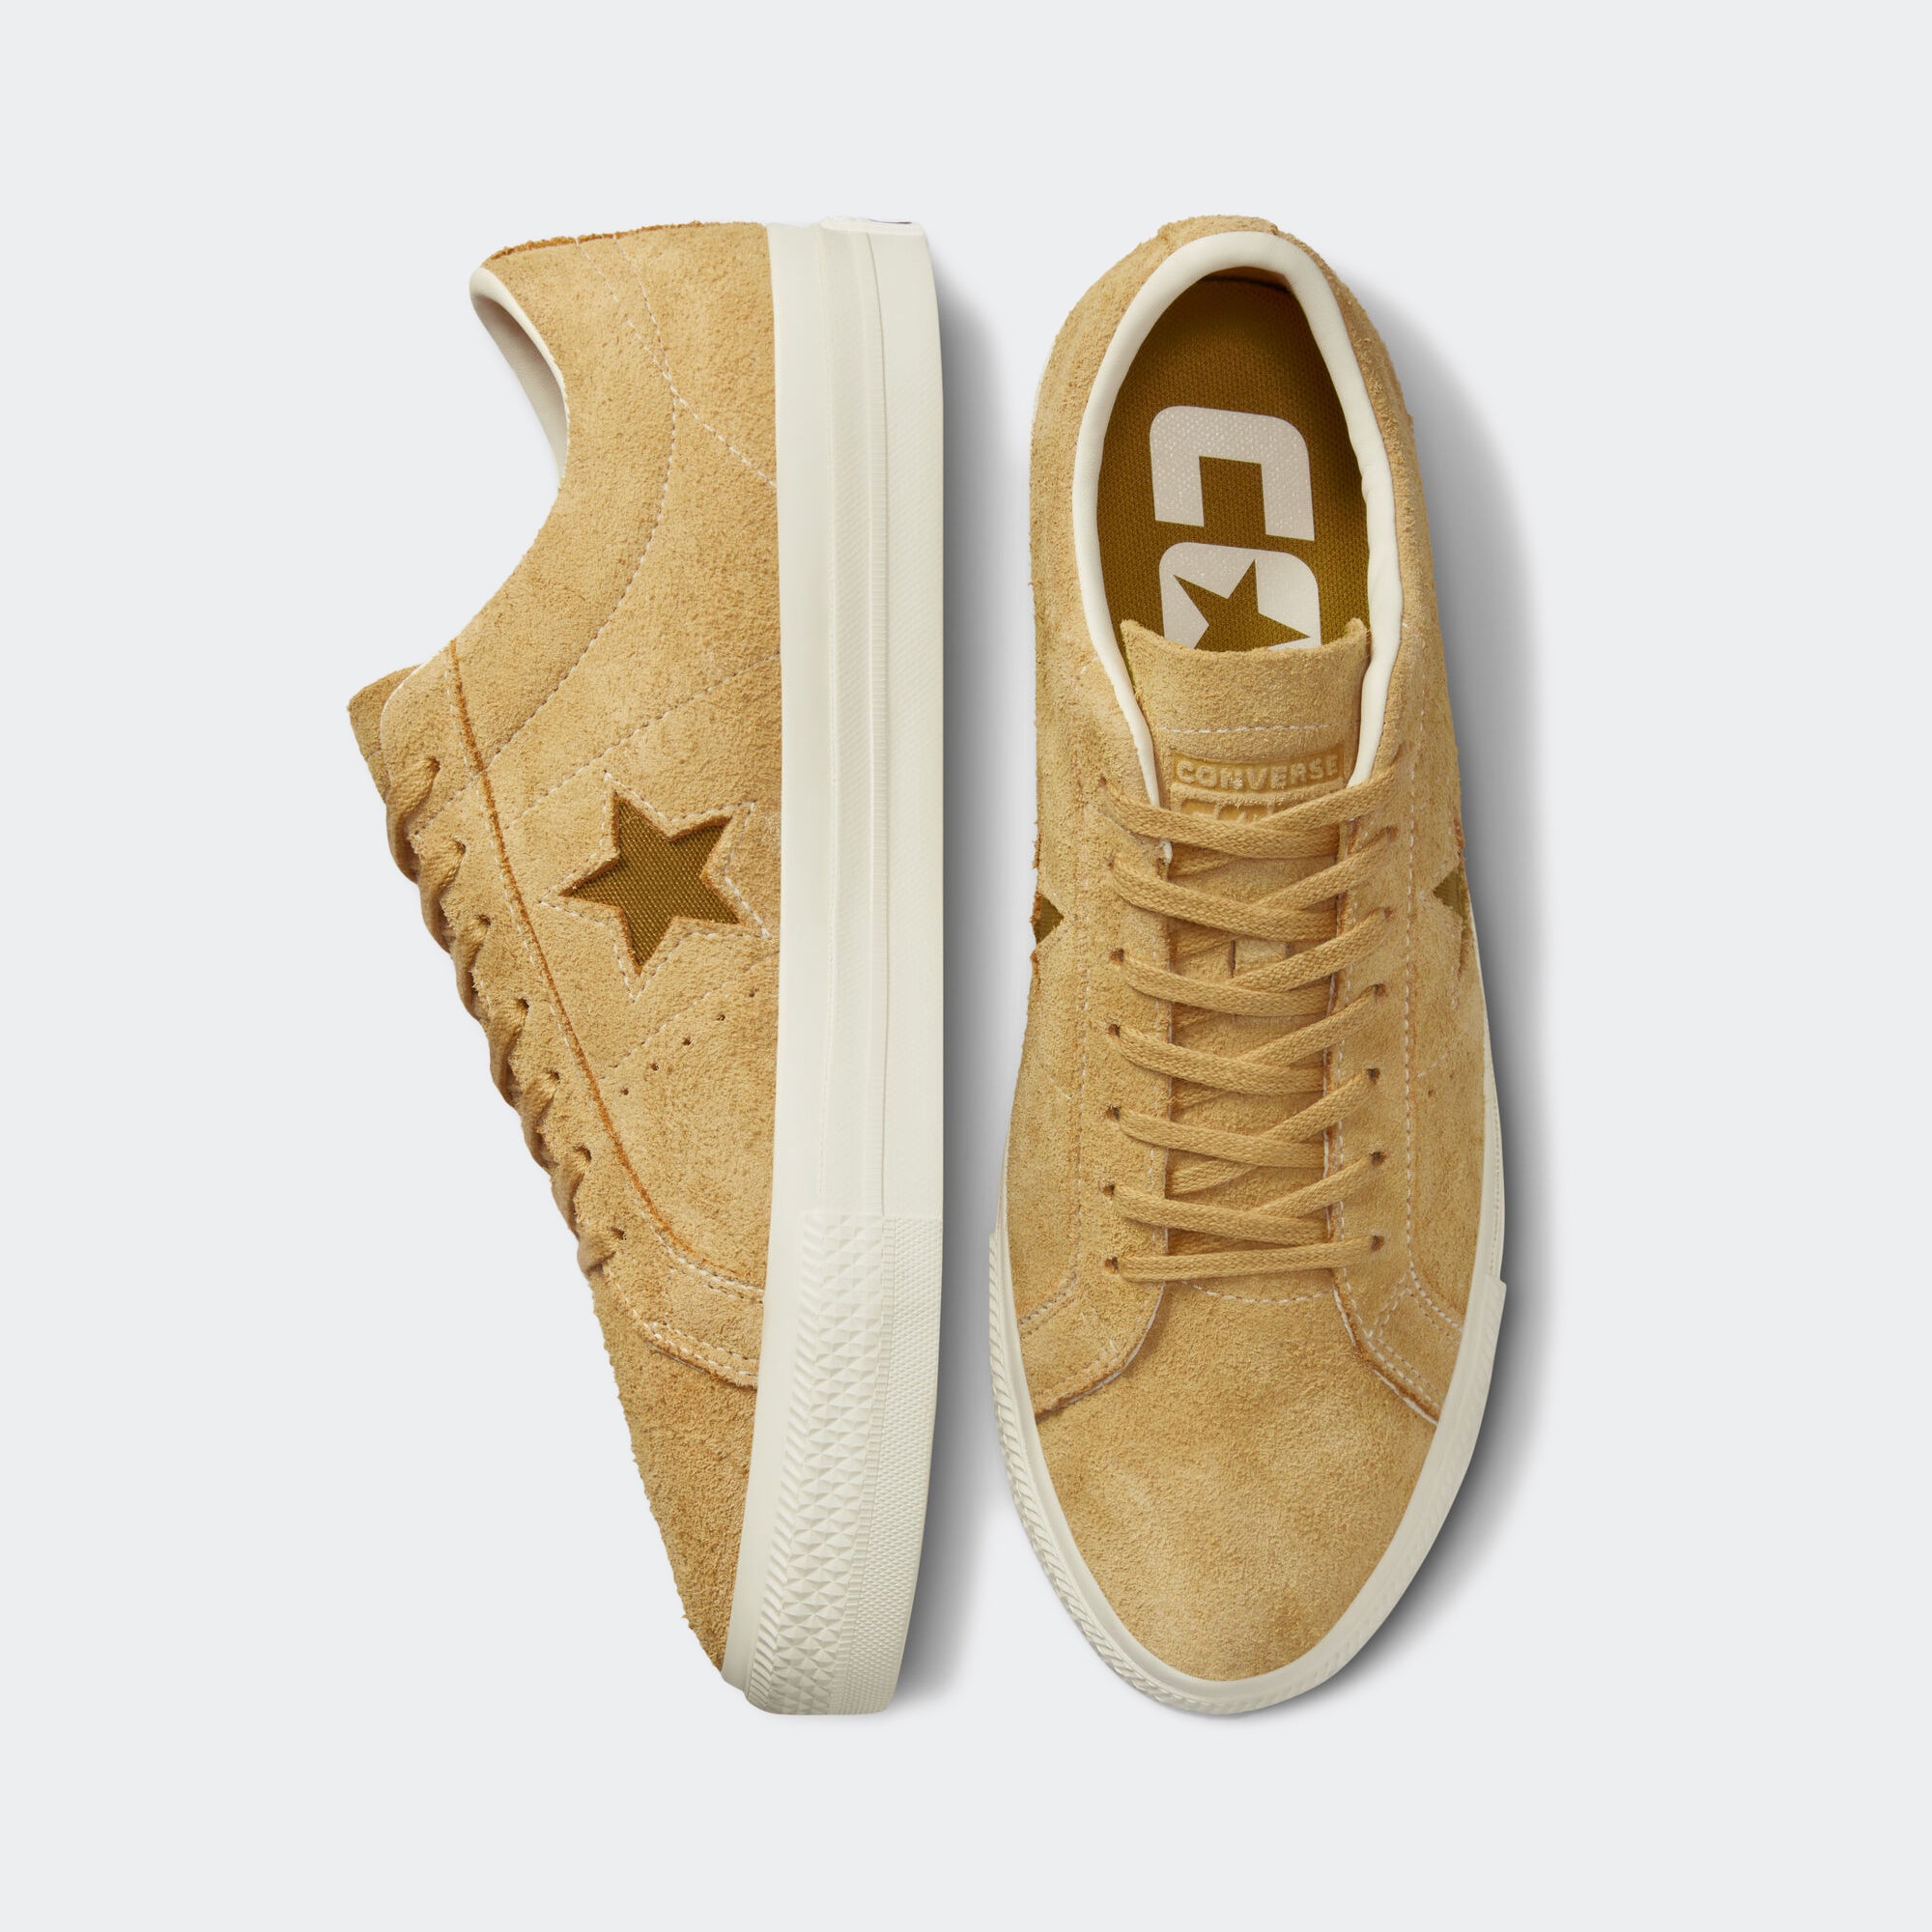 Converse One Star Suede Gold | Chicago City Sports